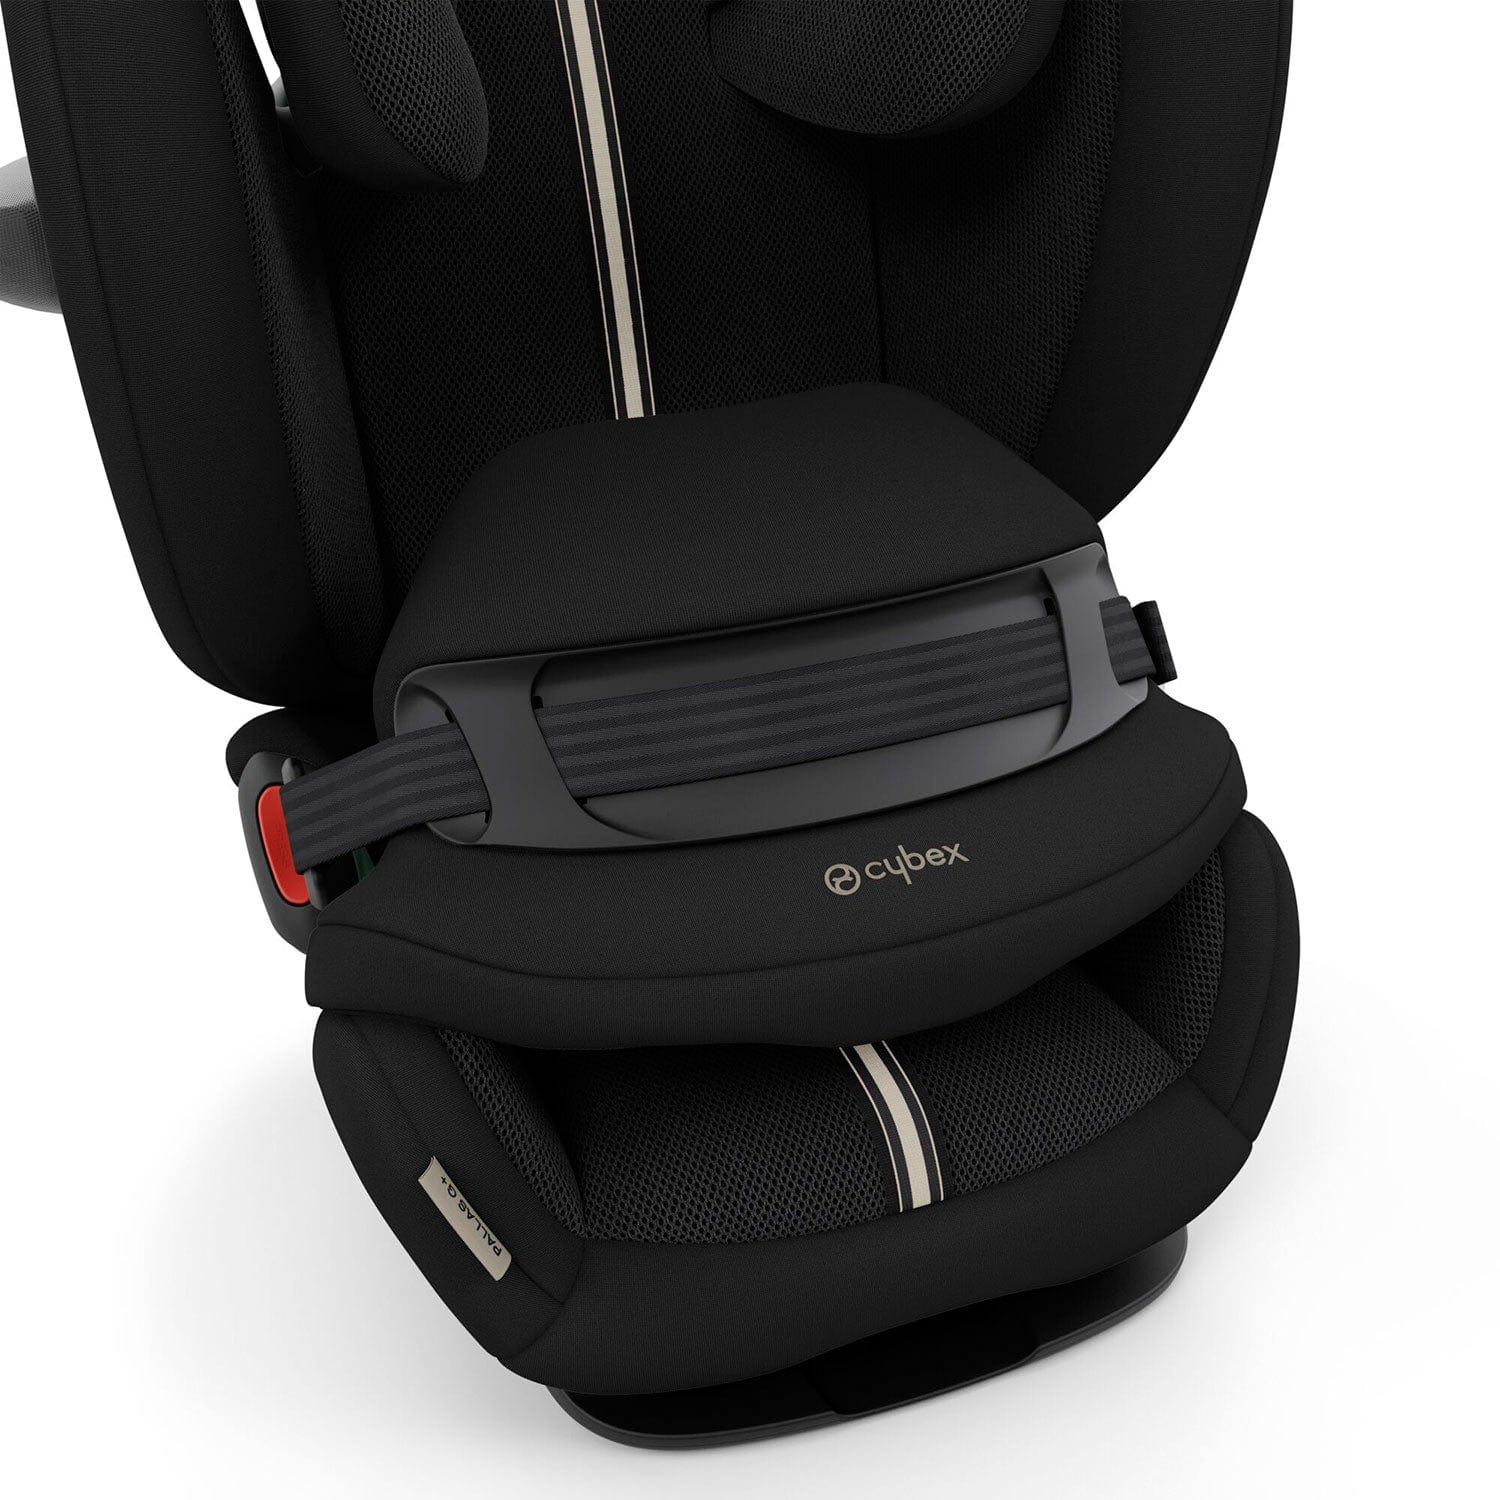 Cybex Pallas G i-Size child seat from 15 month